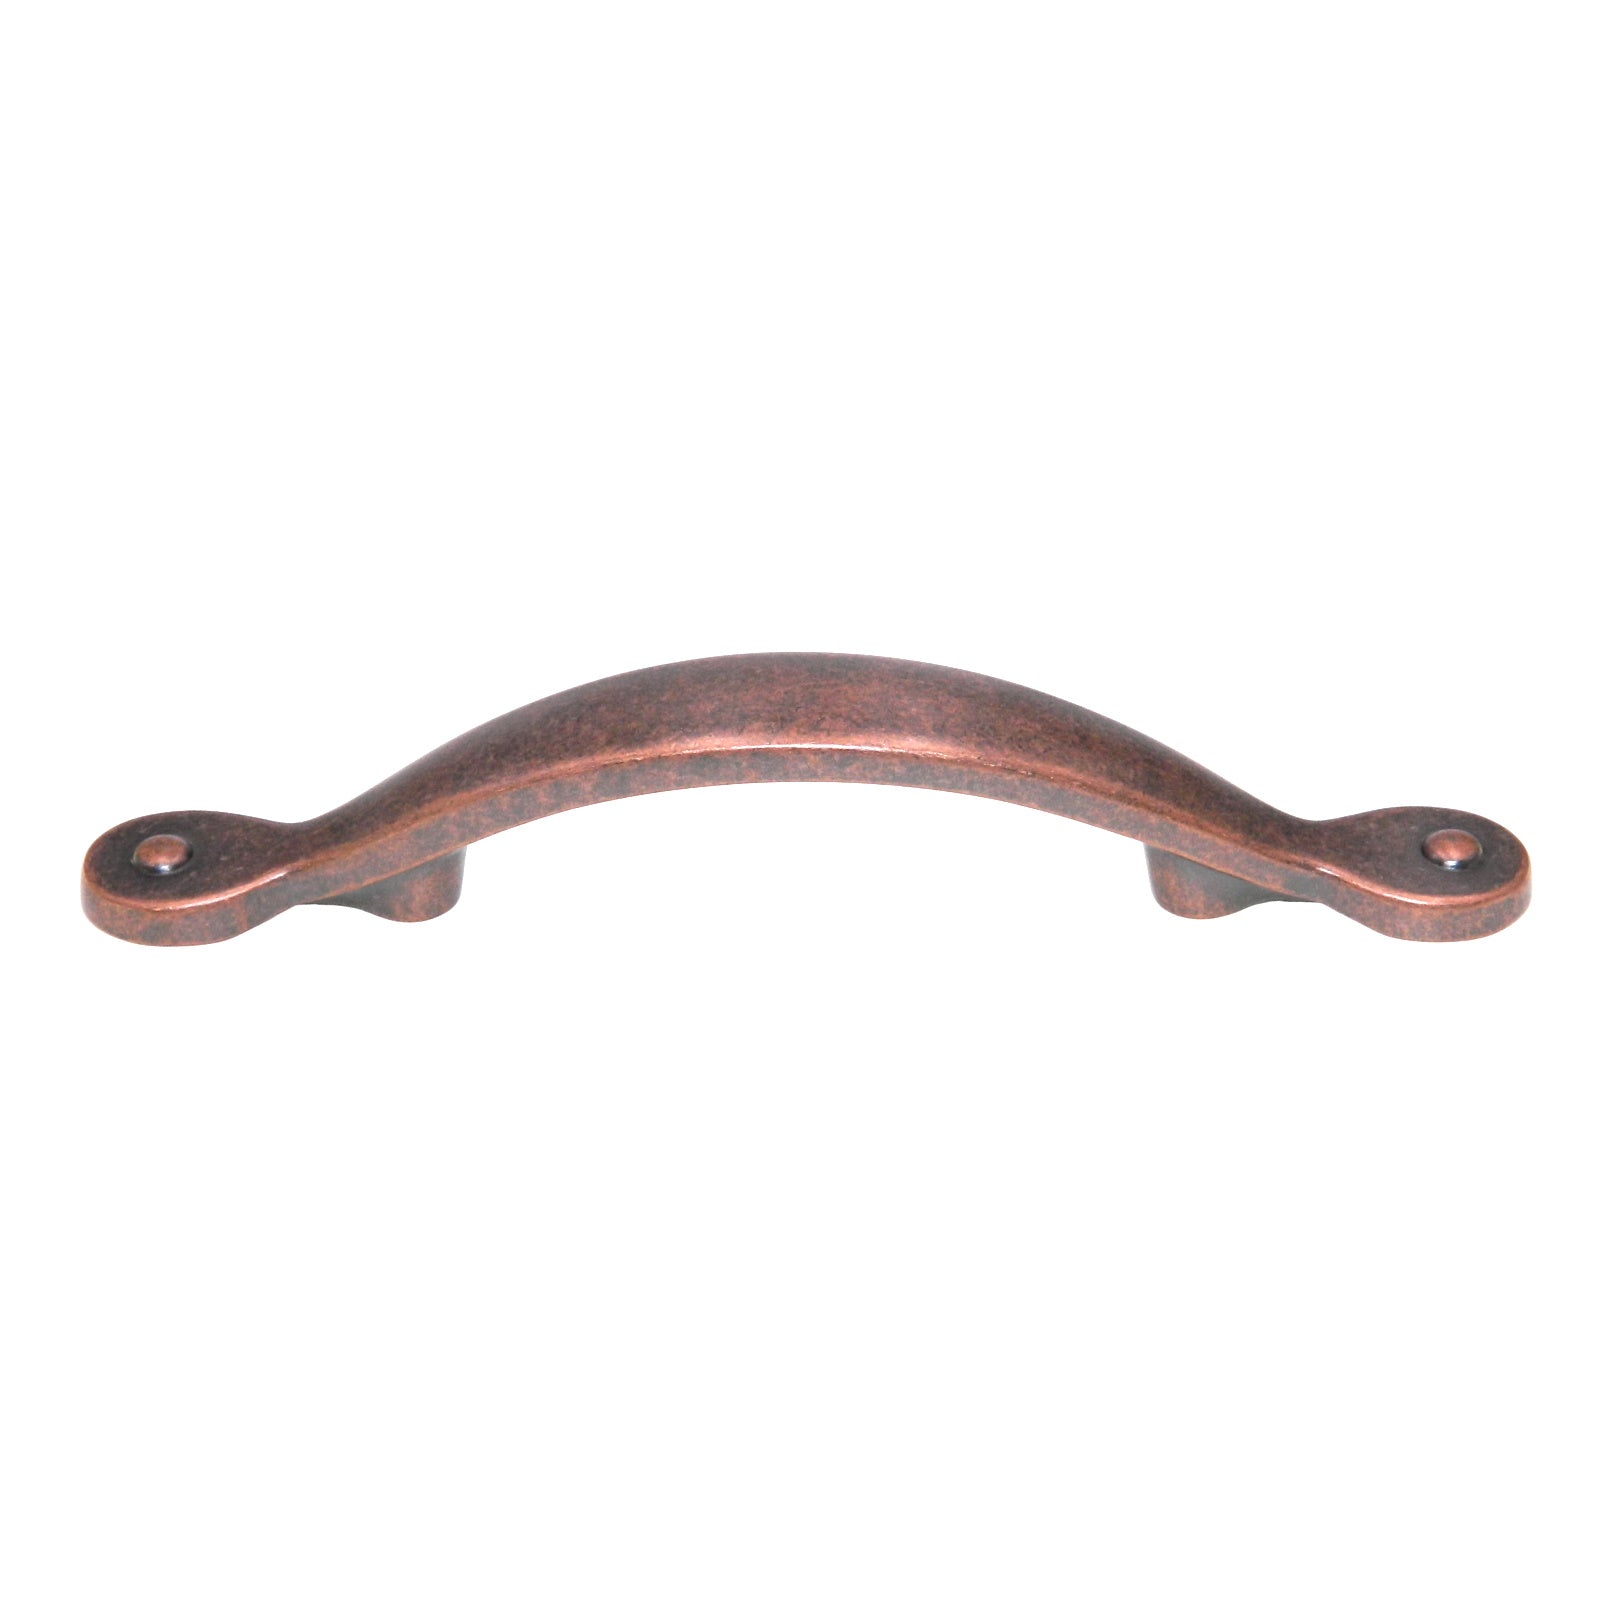 Amerock Inspirations BP1590-WC Weathered Copper 3" Cabinet Handle Pull